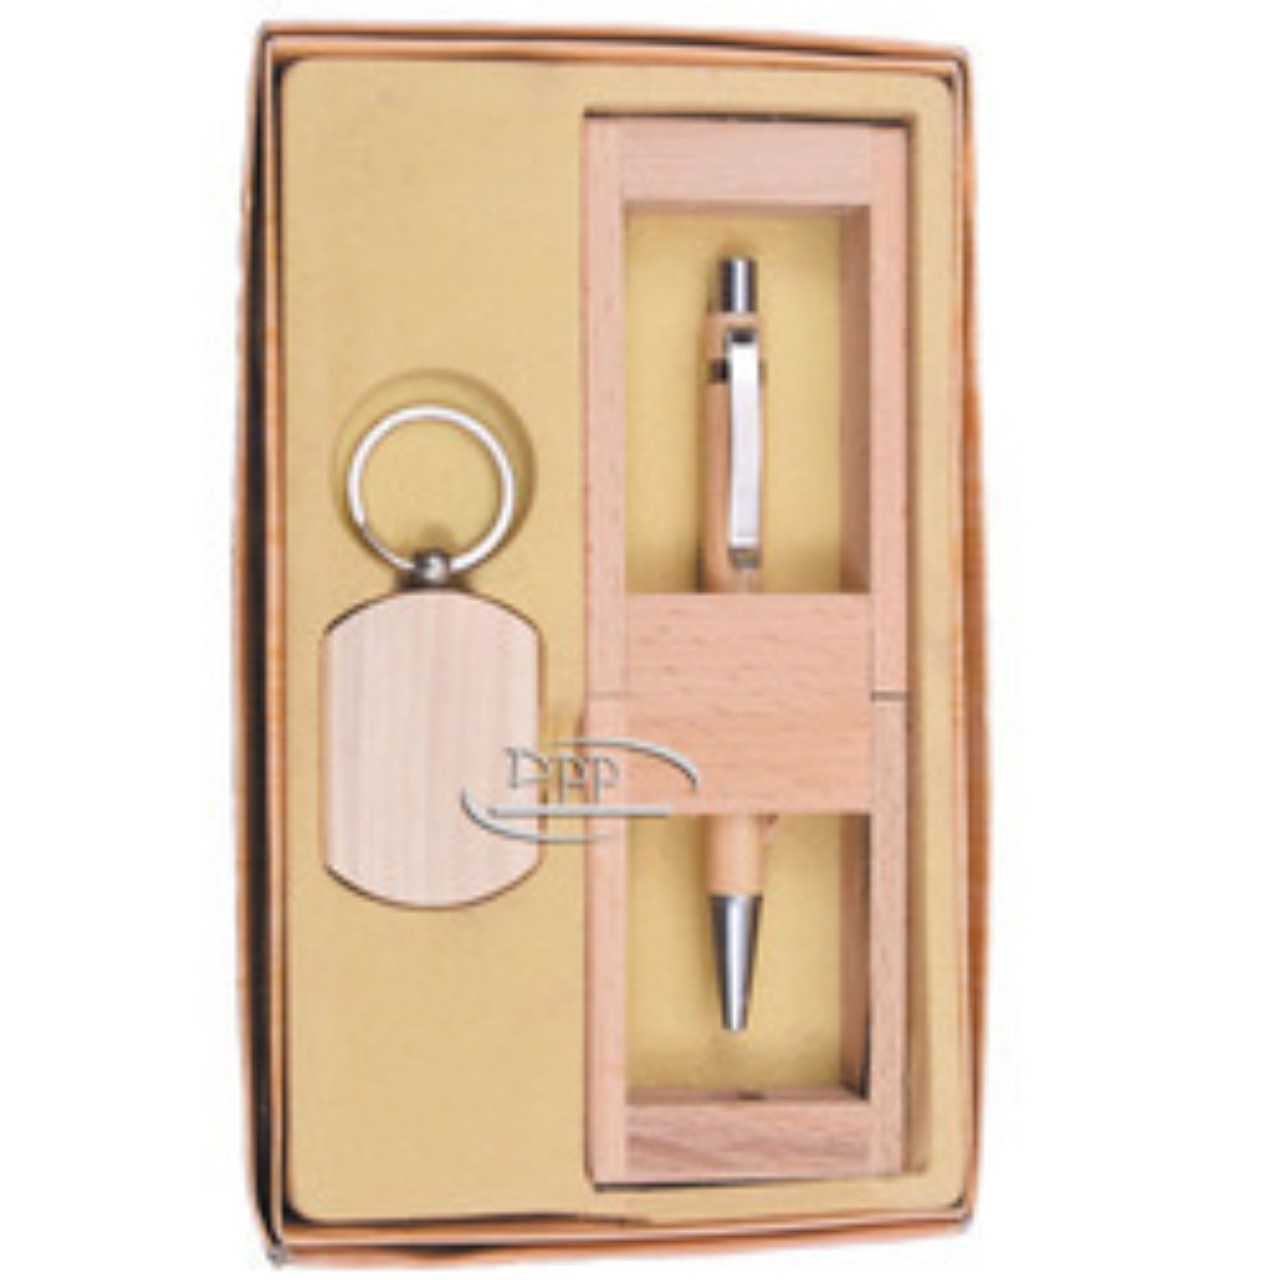 WOODEN FINISH GIFTS SET DW 1032P rs 80 0 large